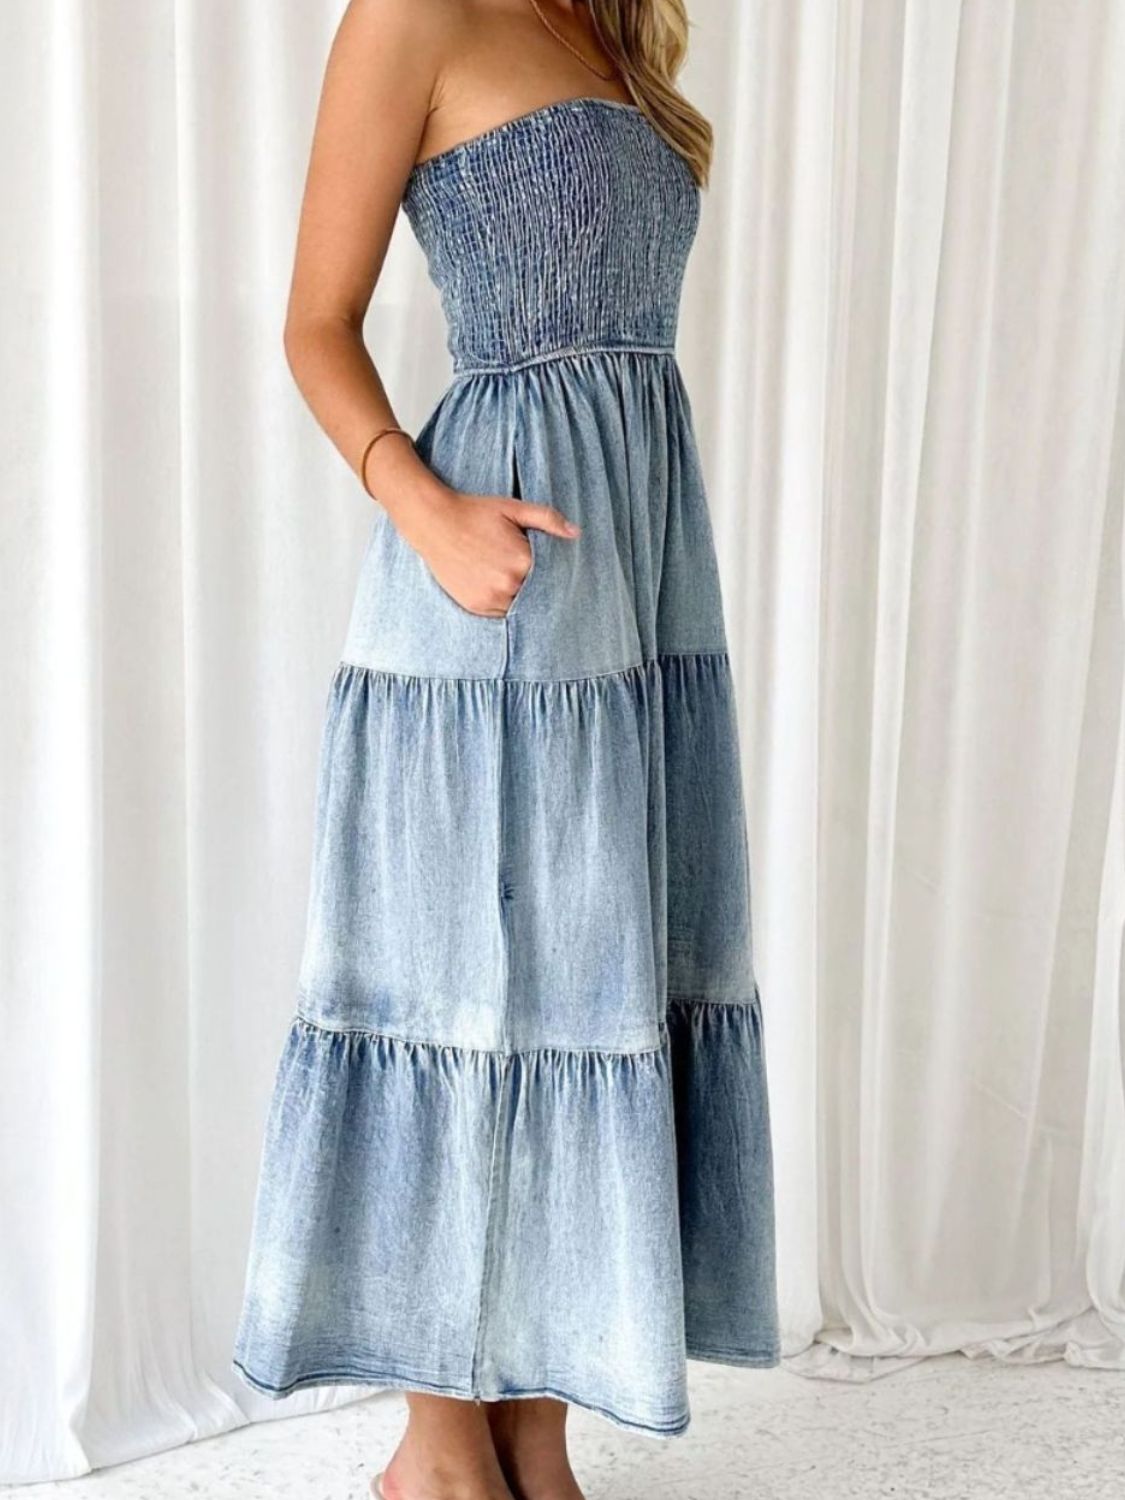 Tube Top Tiered Denim Dress with Slit